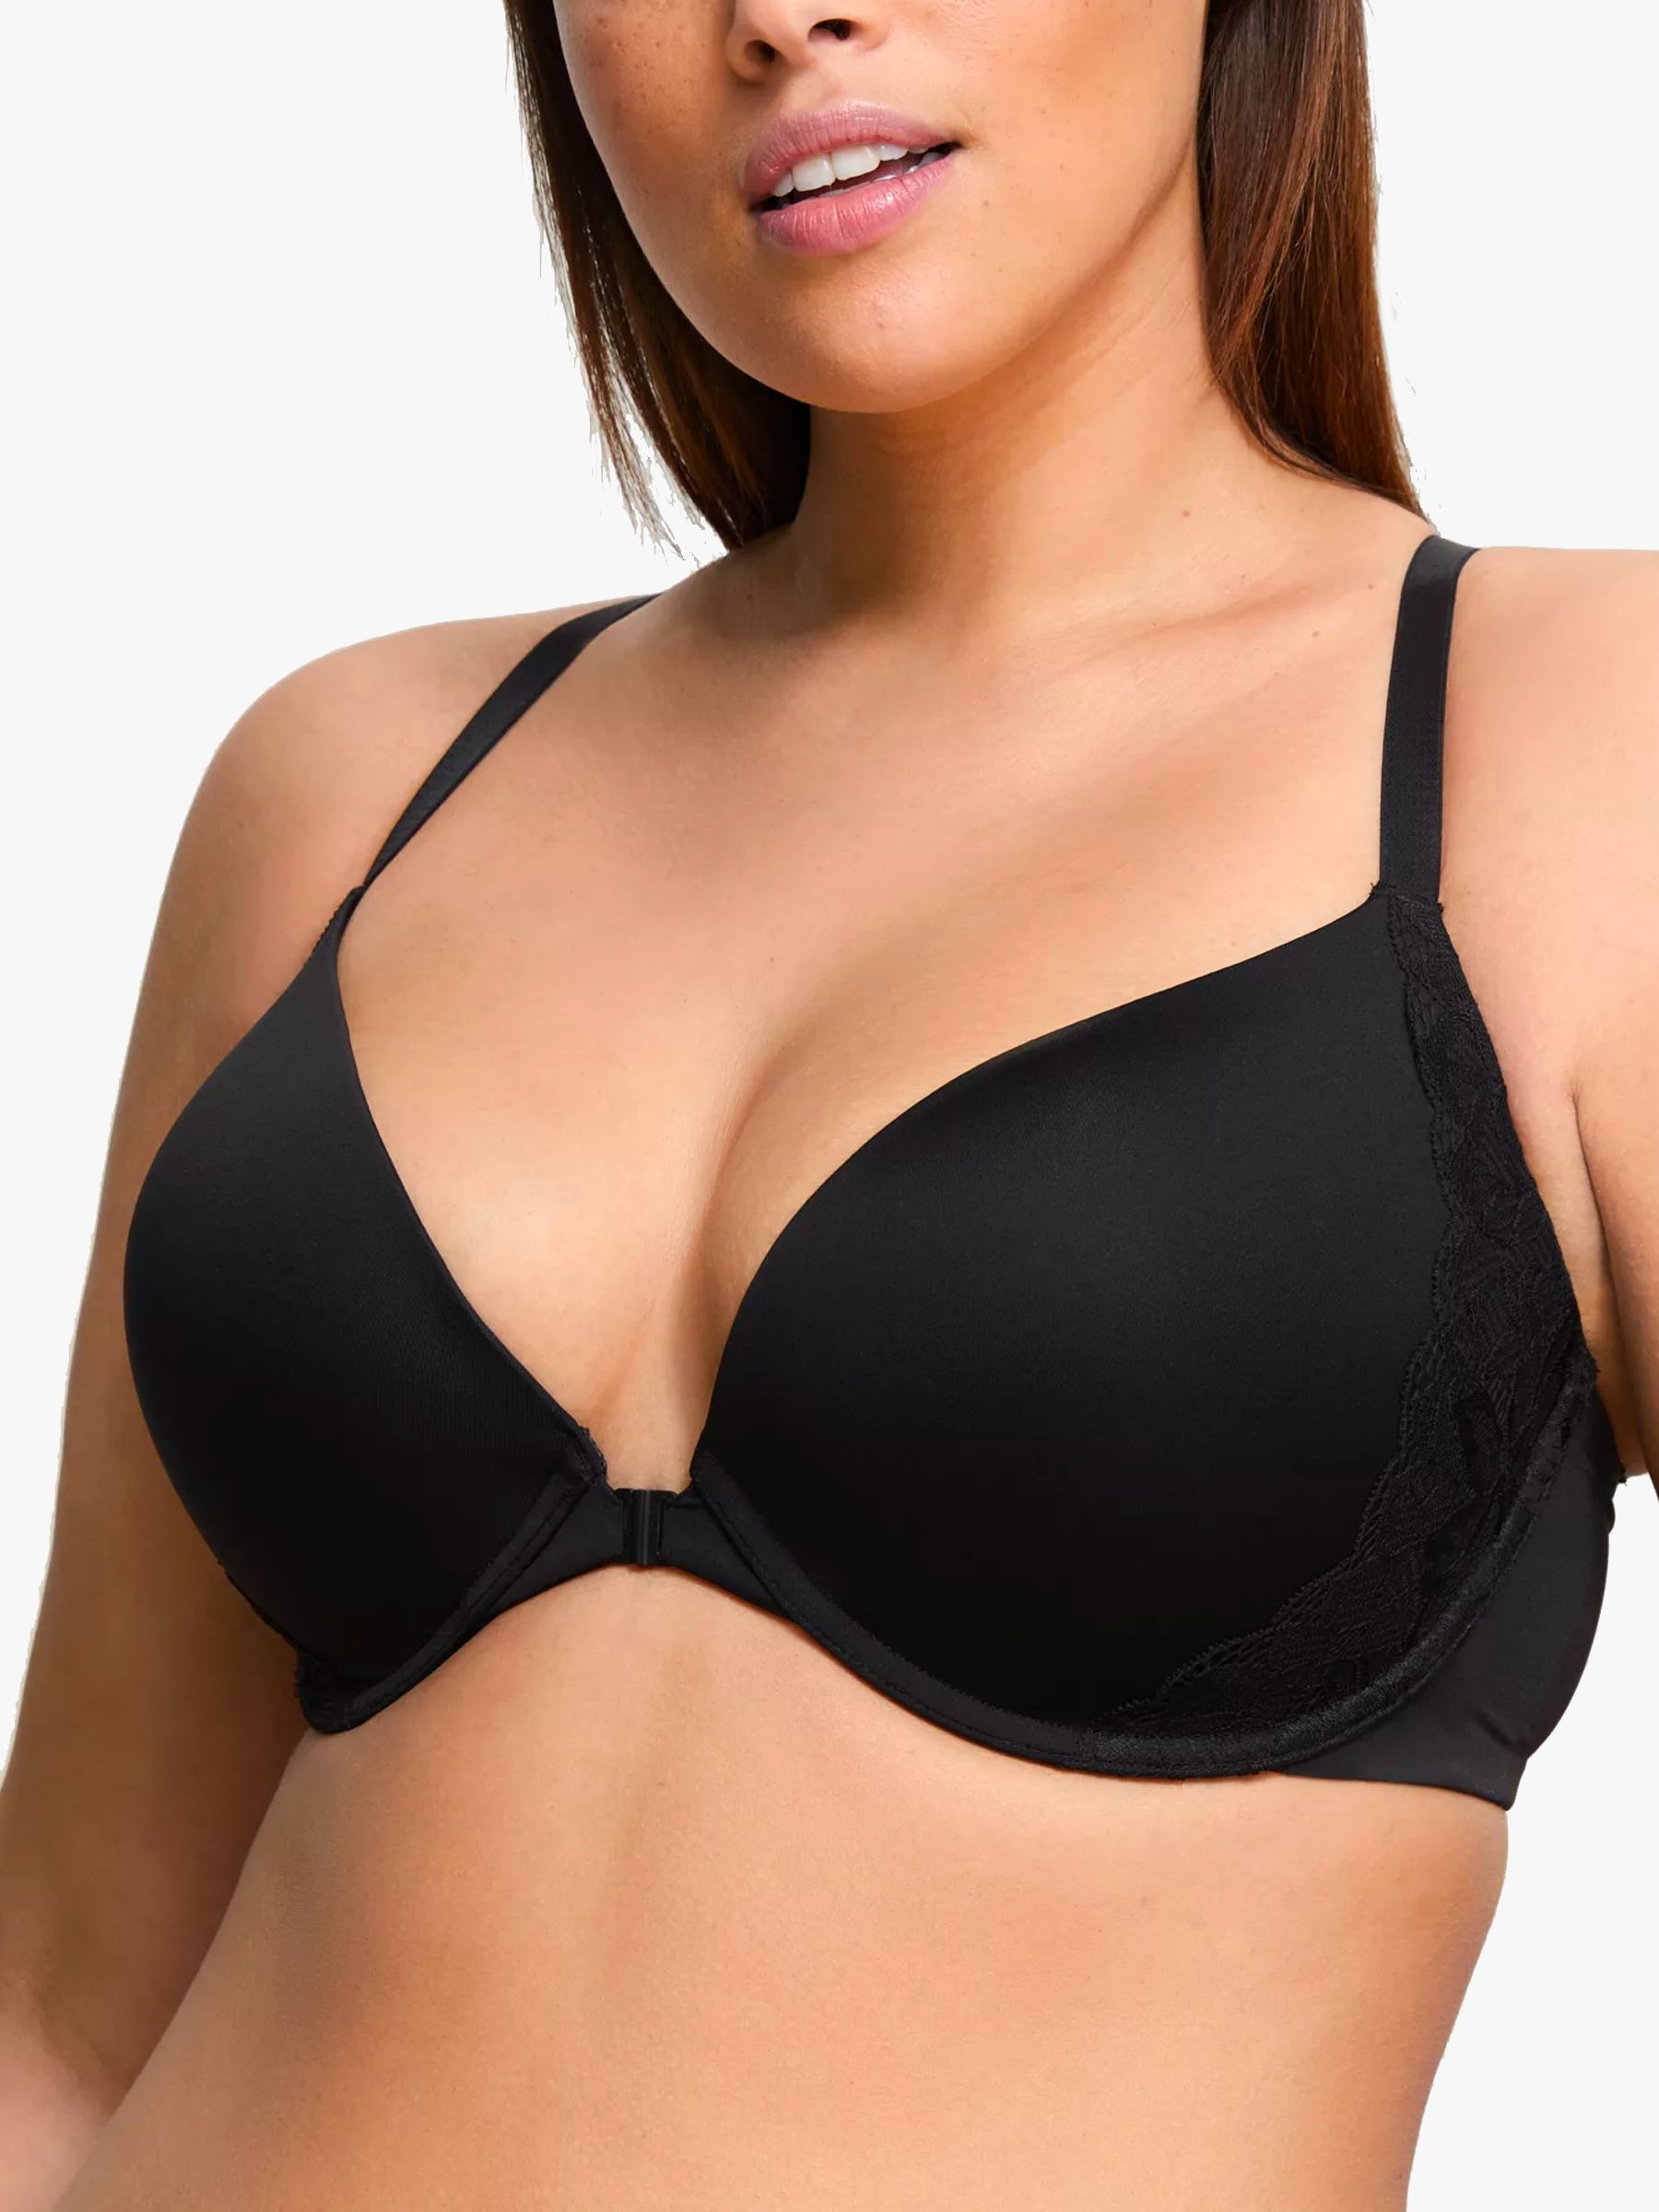 Average Size Figure Types in 36FF Bra Size FF Cup Sizes